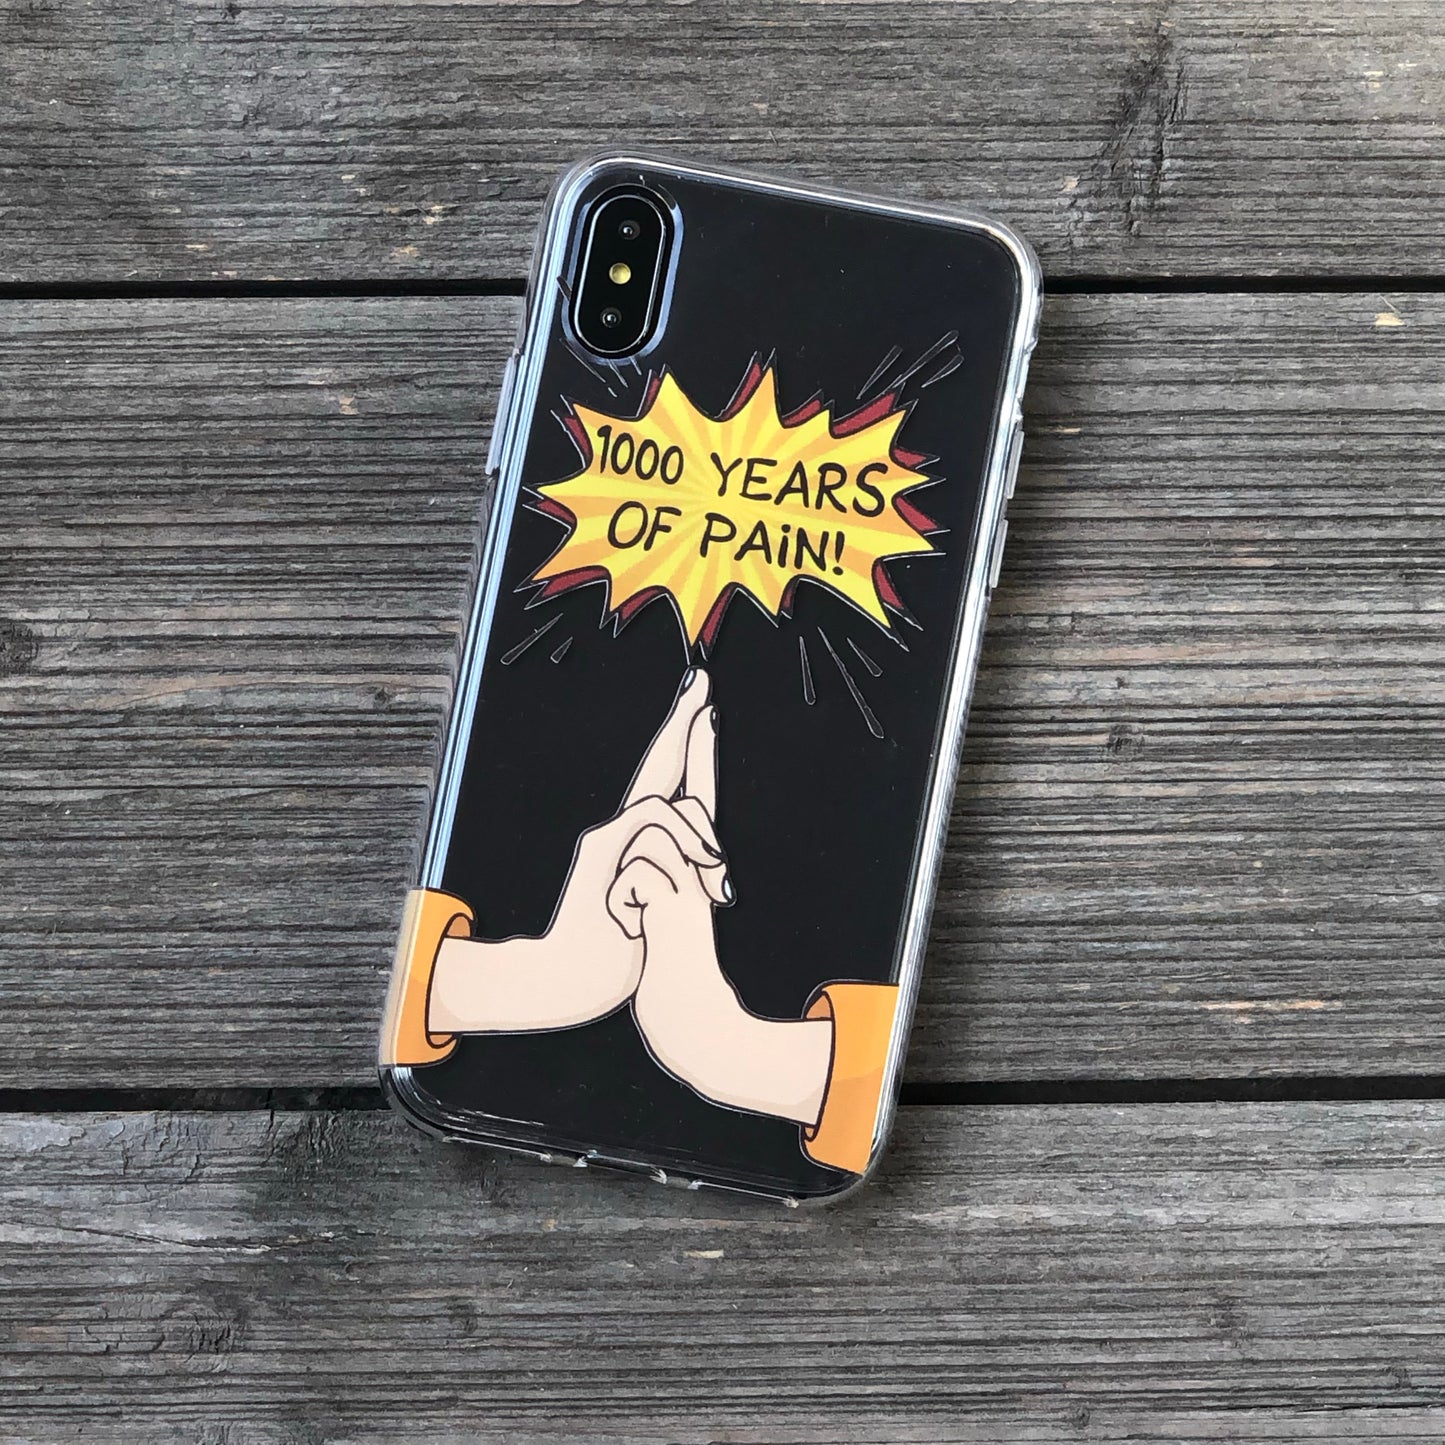 1000 years of pain jutsu iphone case clear silicone